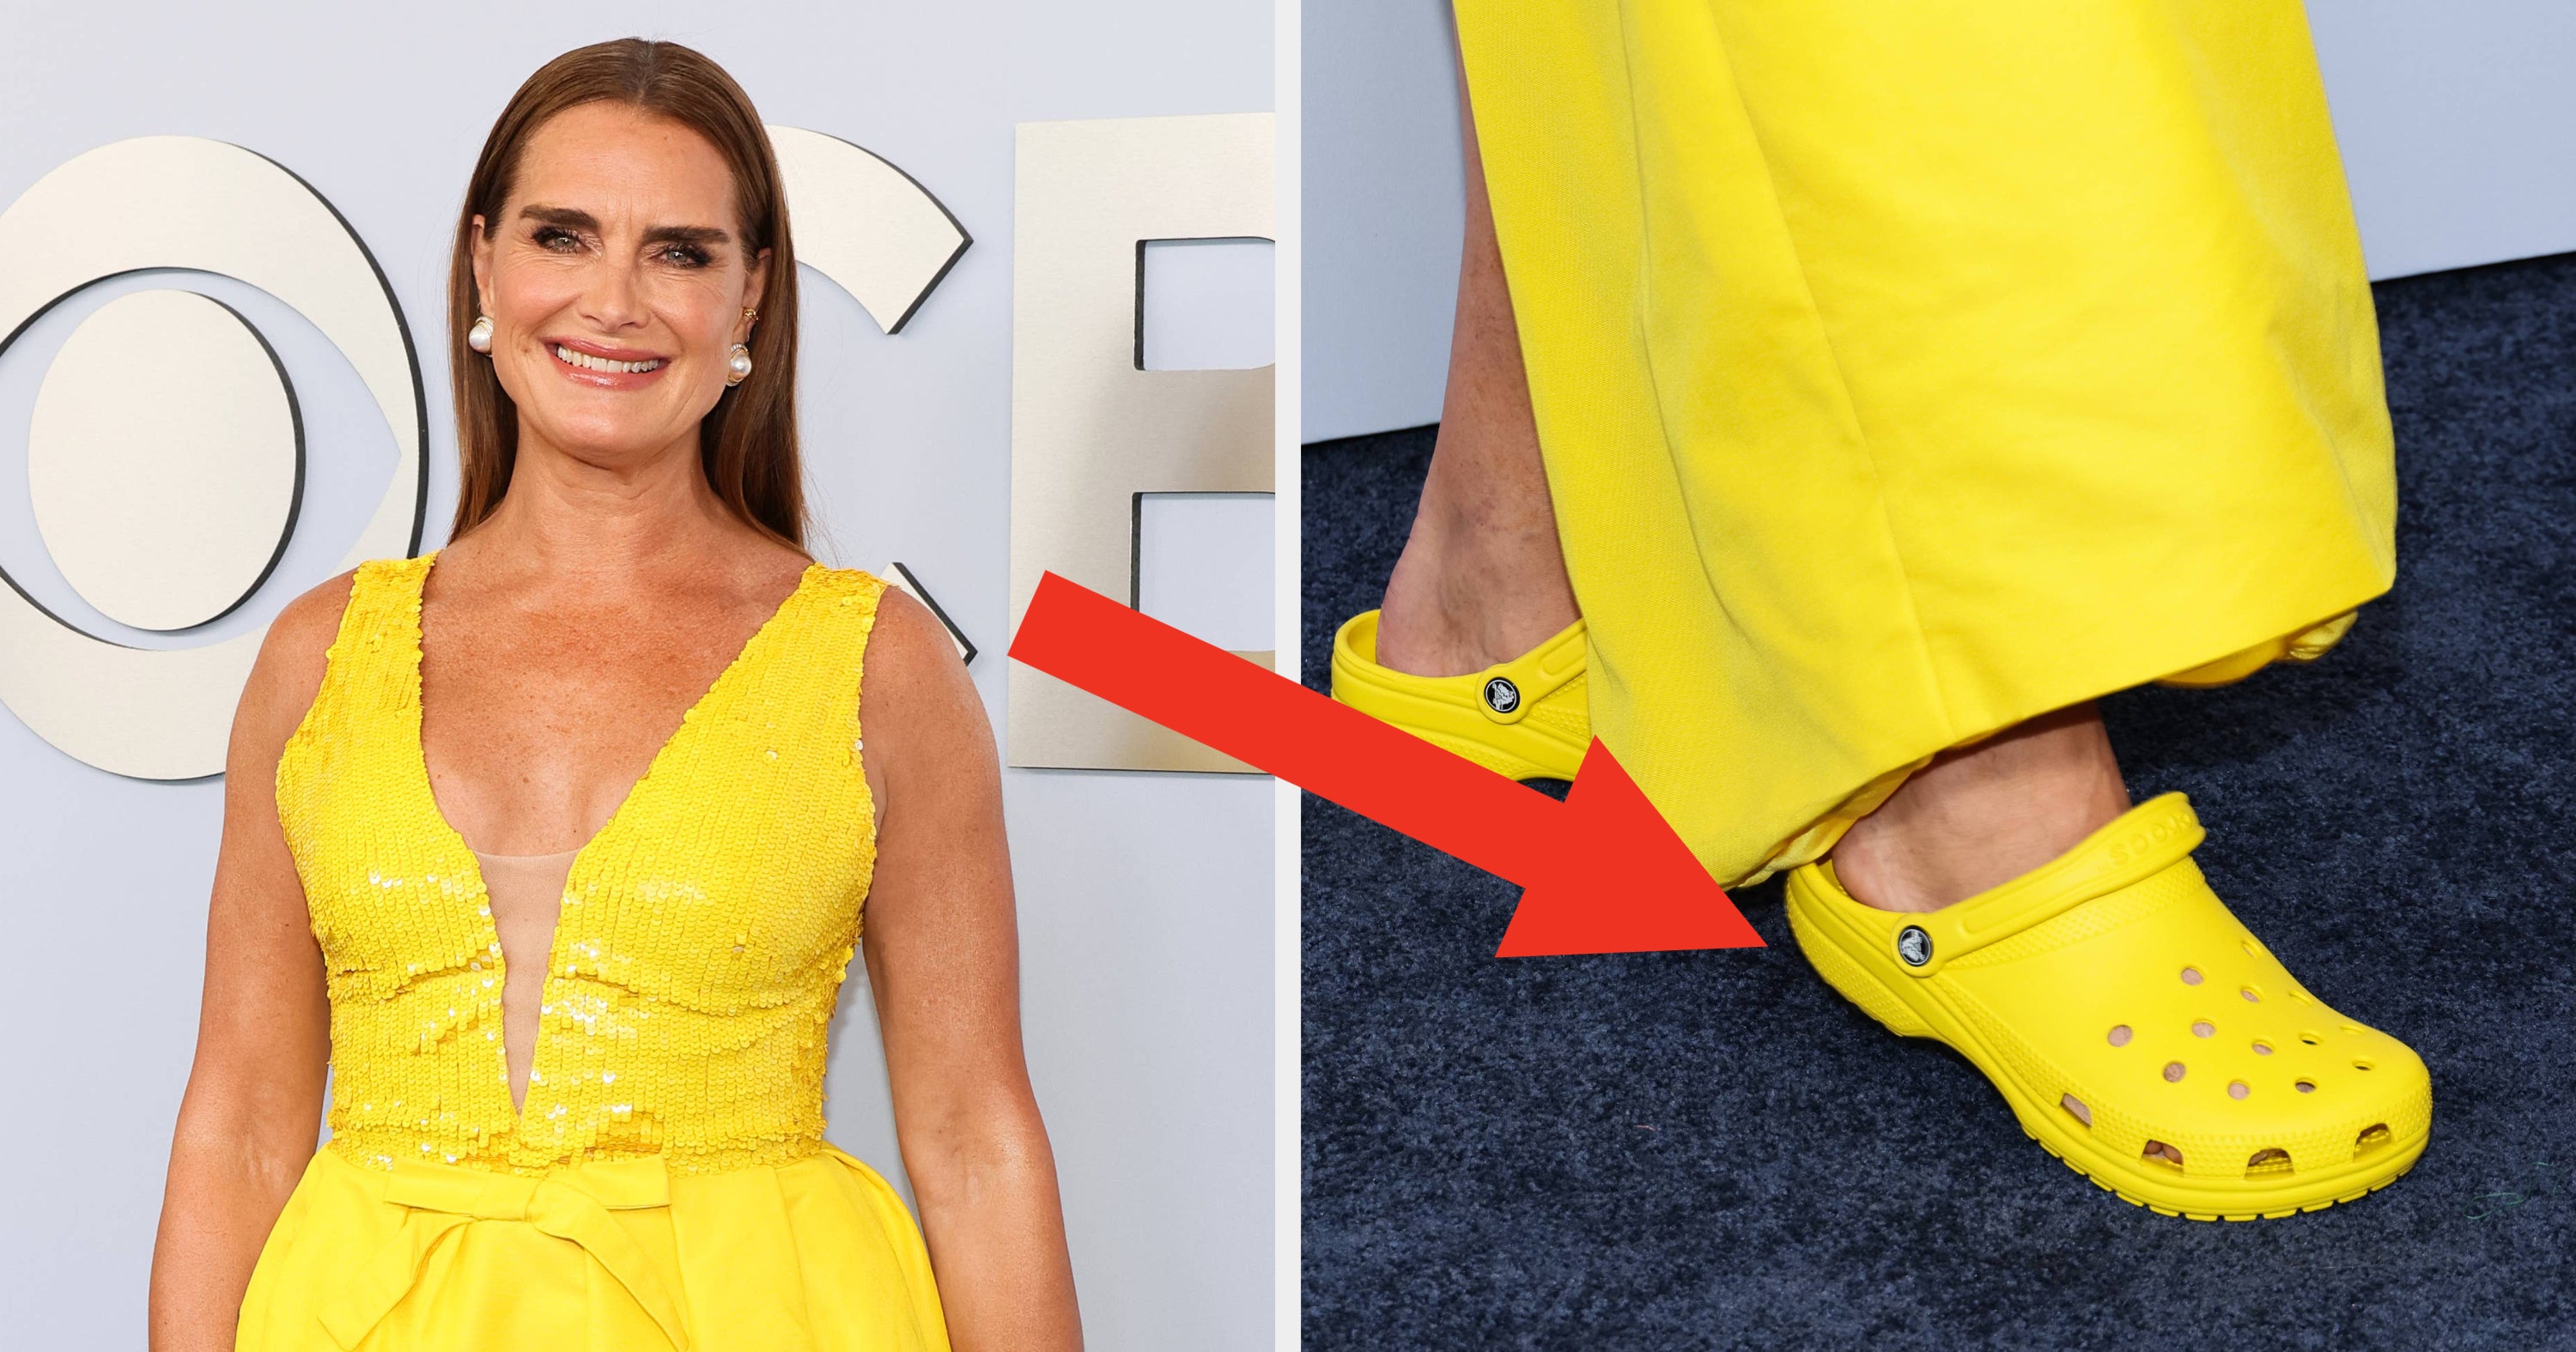 Brooke Shields Had A Very Important Reason For Wearing Crocs To The Tony Awards